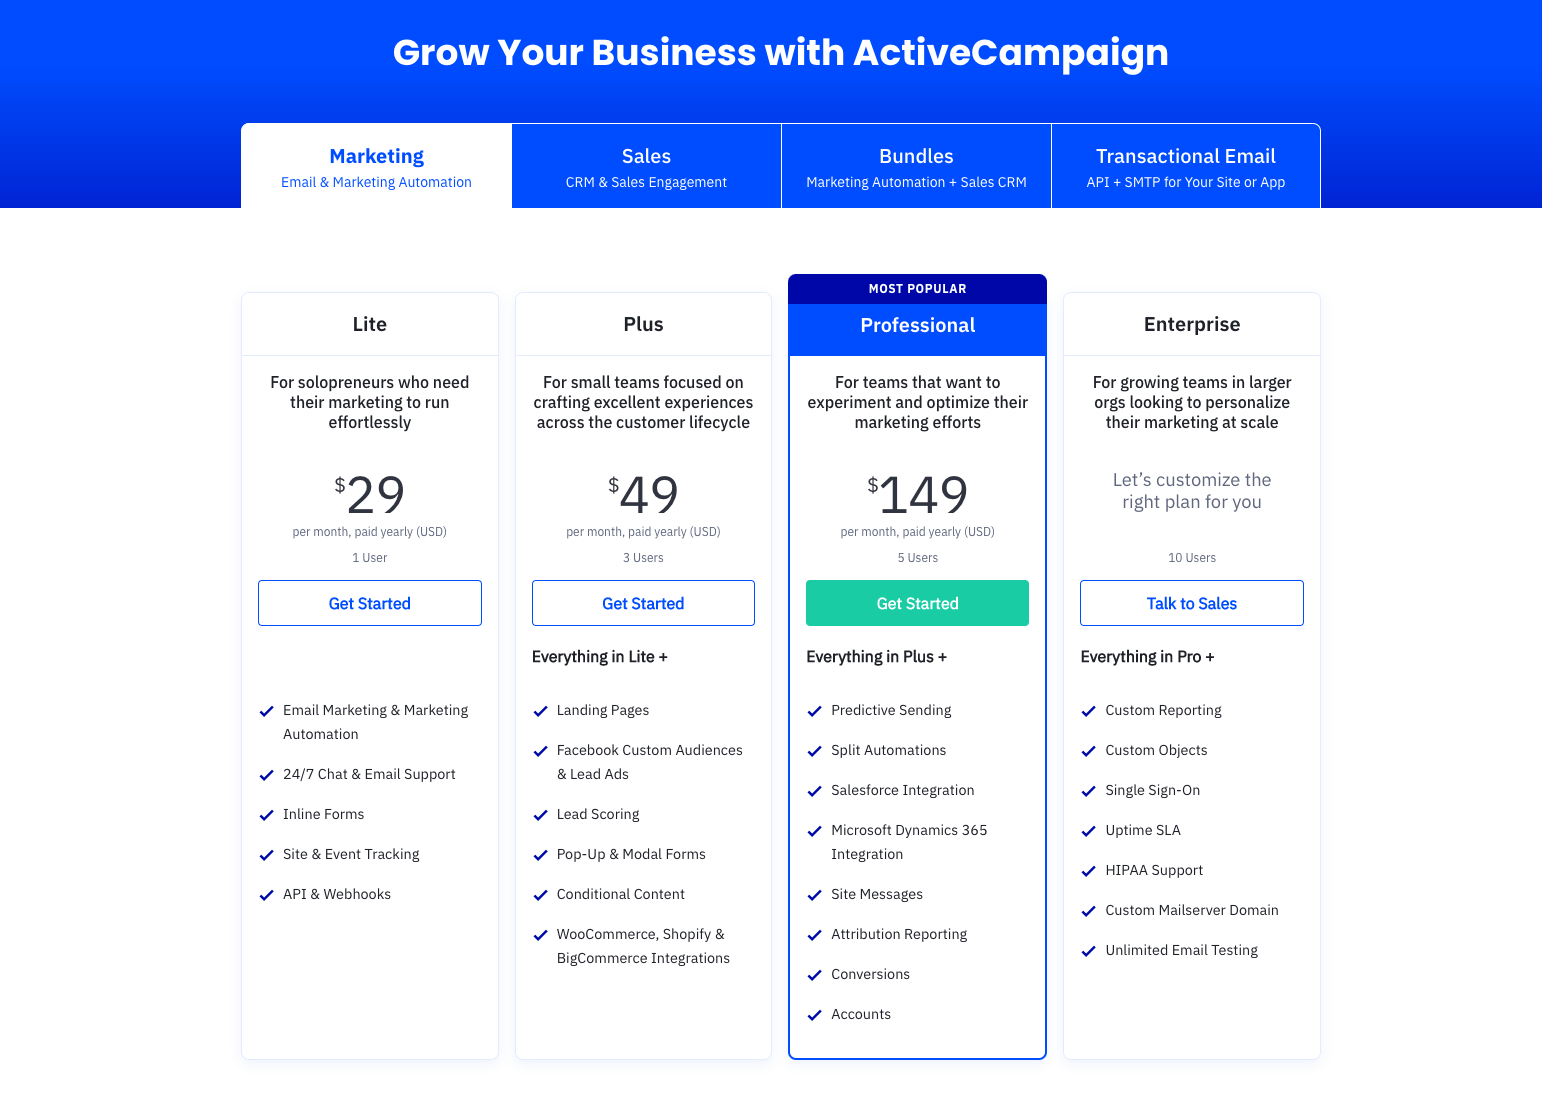 The ActiveCampaign pricing plans.